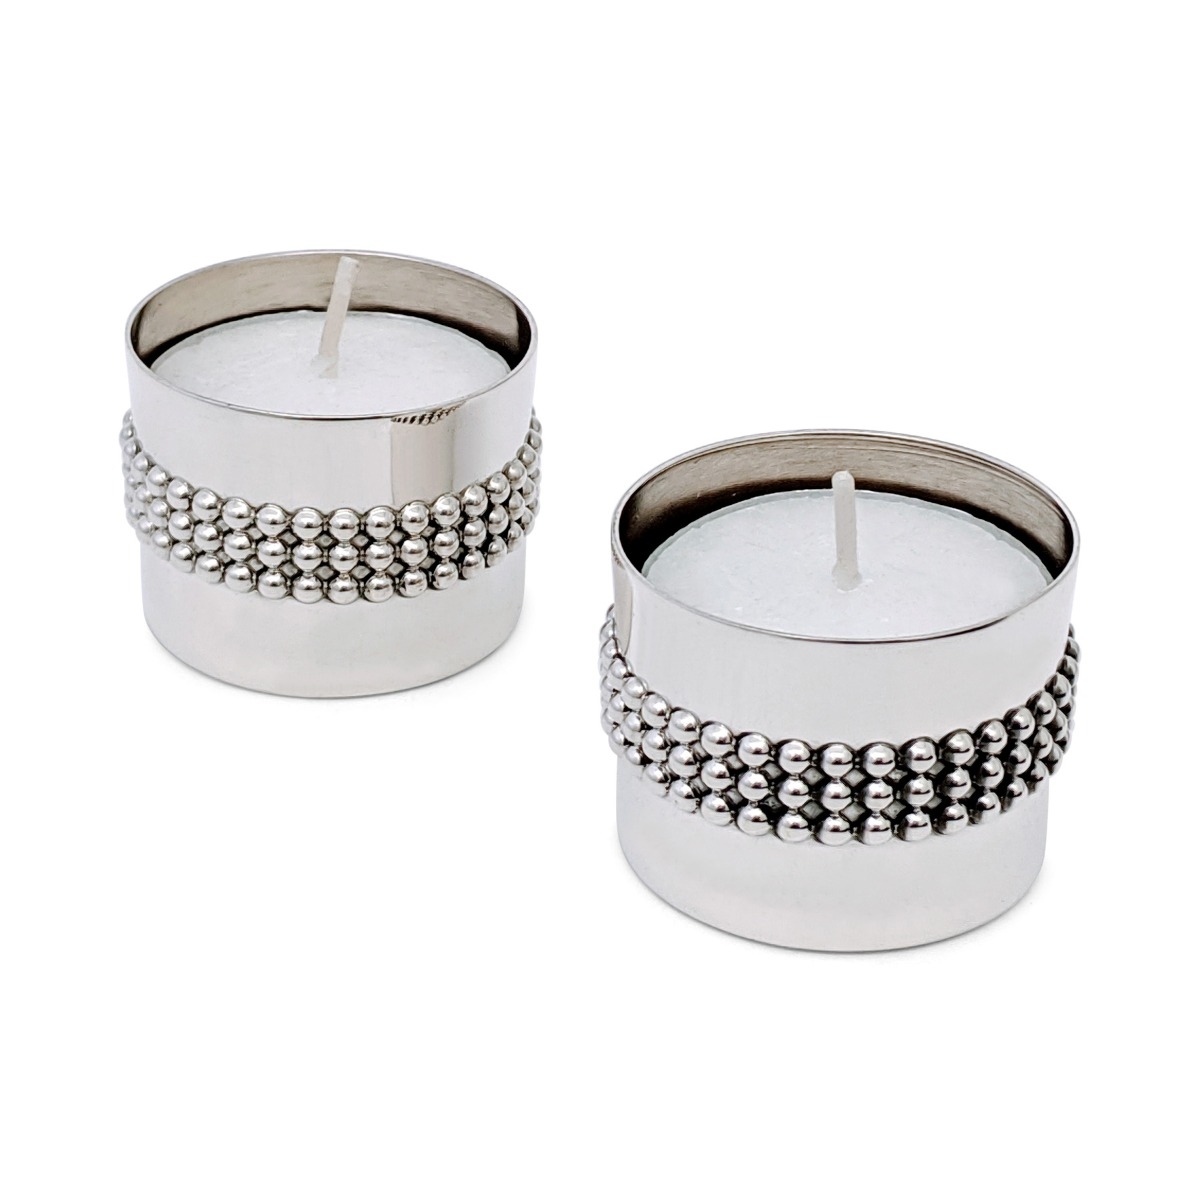 Bier Judaica 925 Sterling Silver Handcrafted Dual Travel Shabbat Candlesticks With Pearl Design - 1